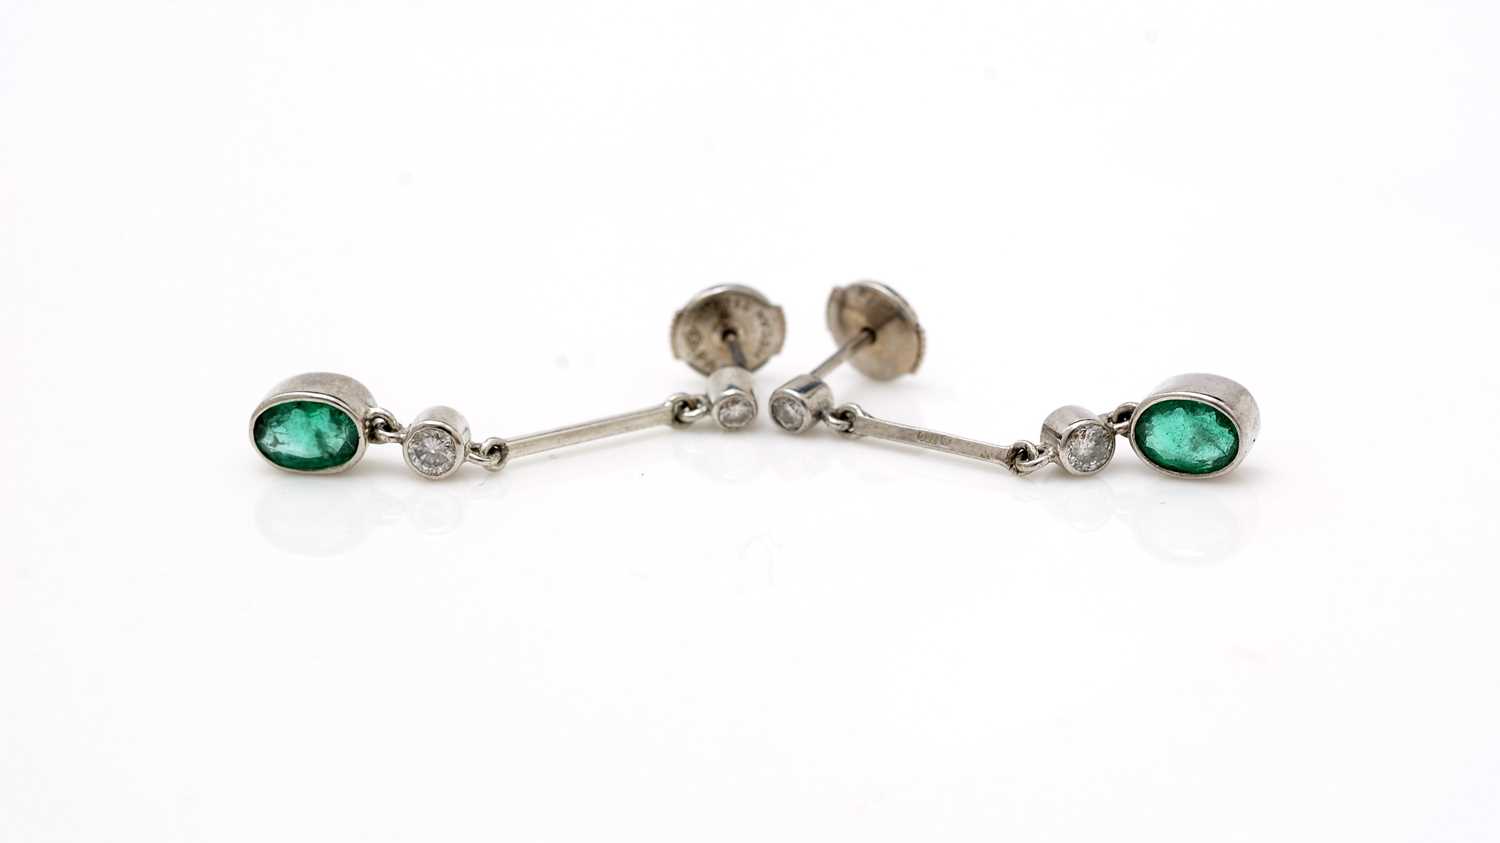 Lot 458 - A pair of emerald and diamond earrings